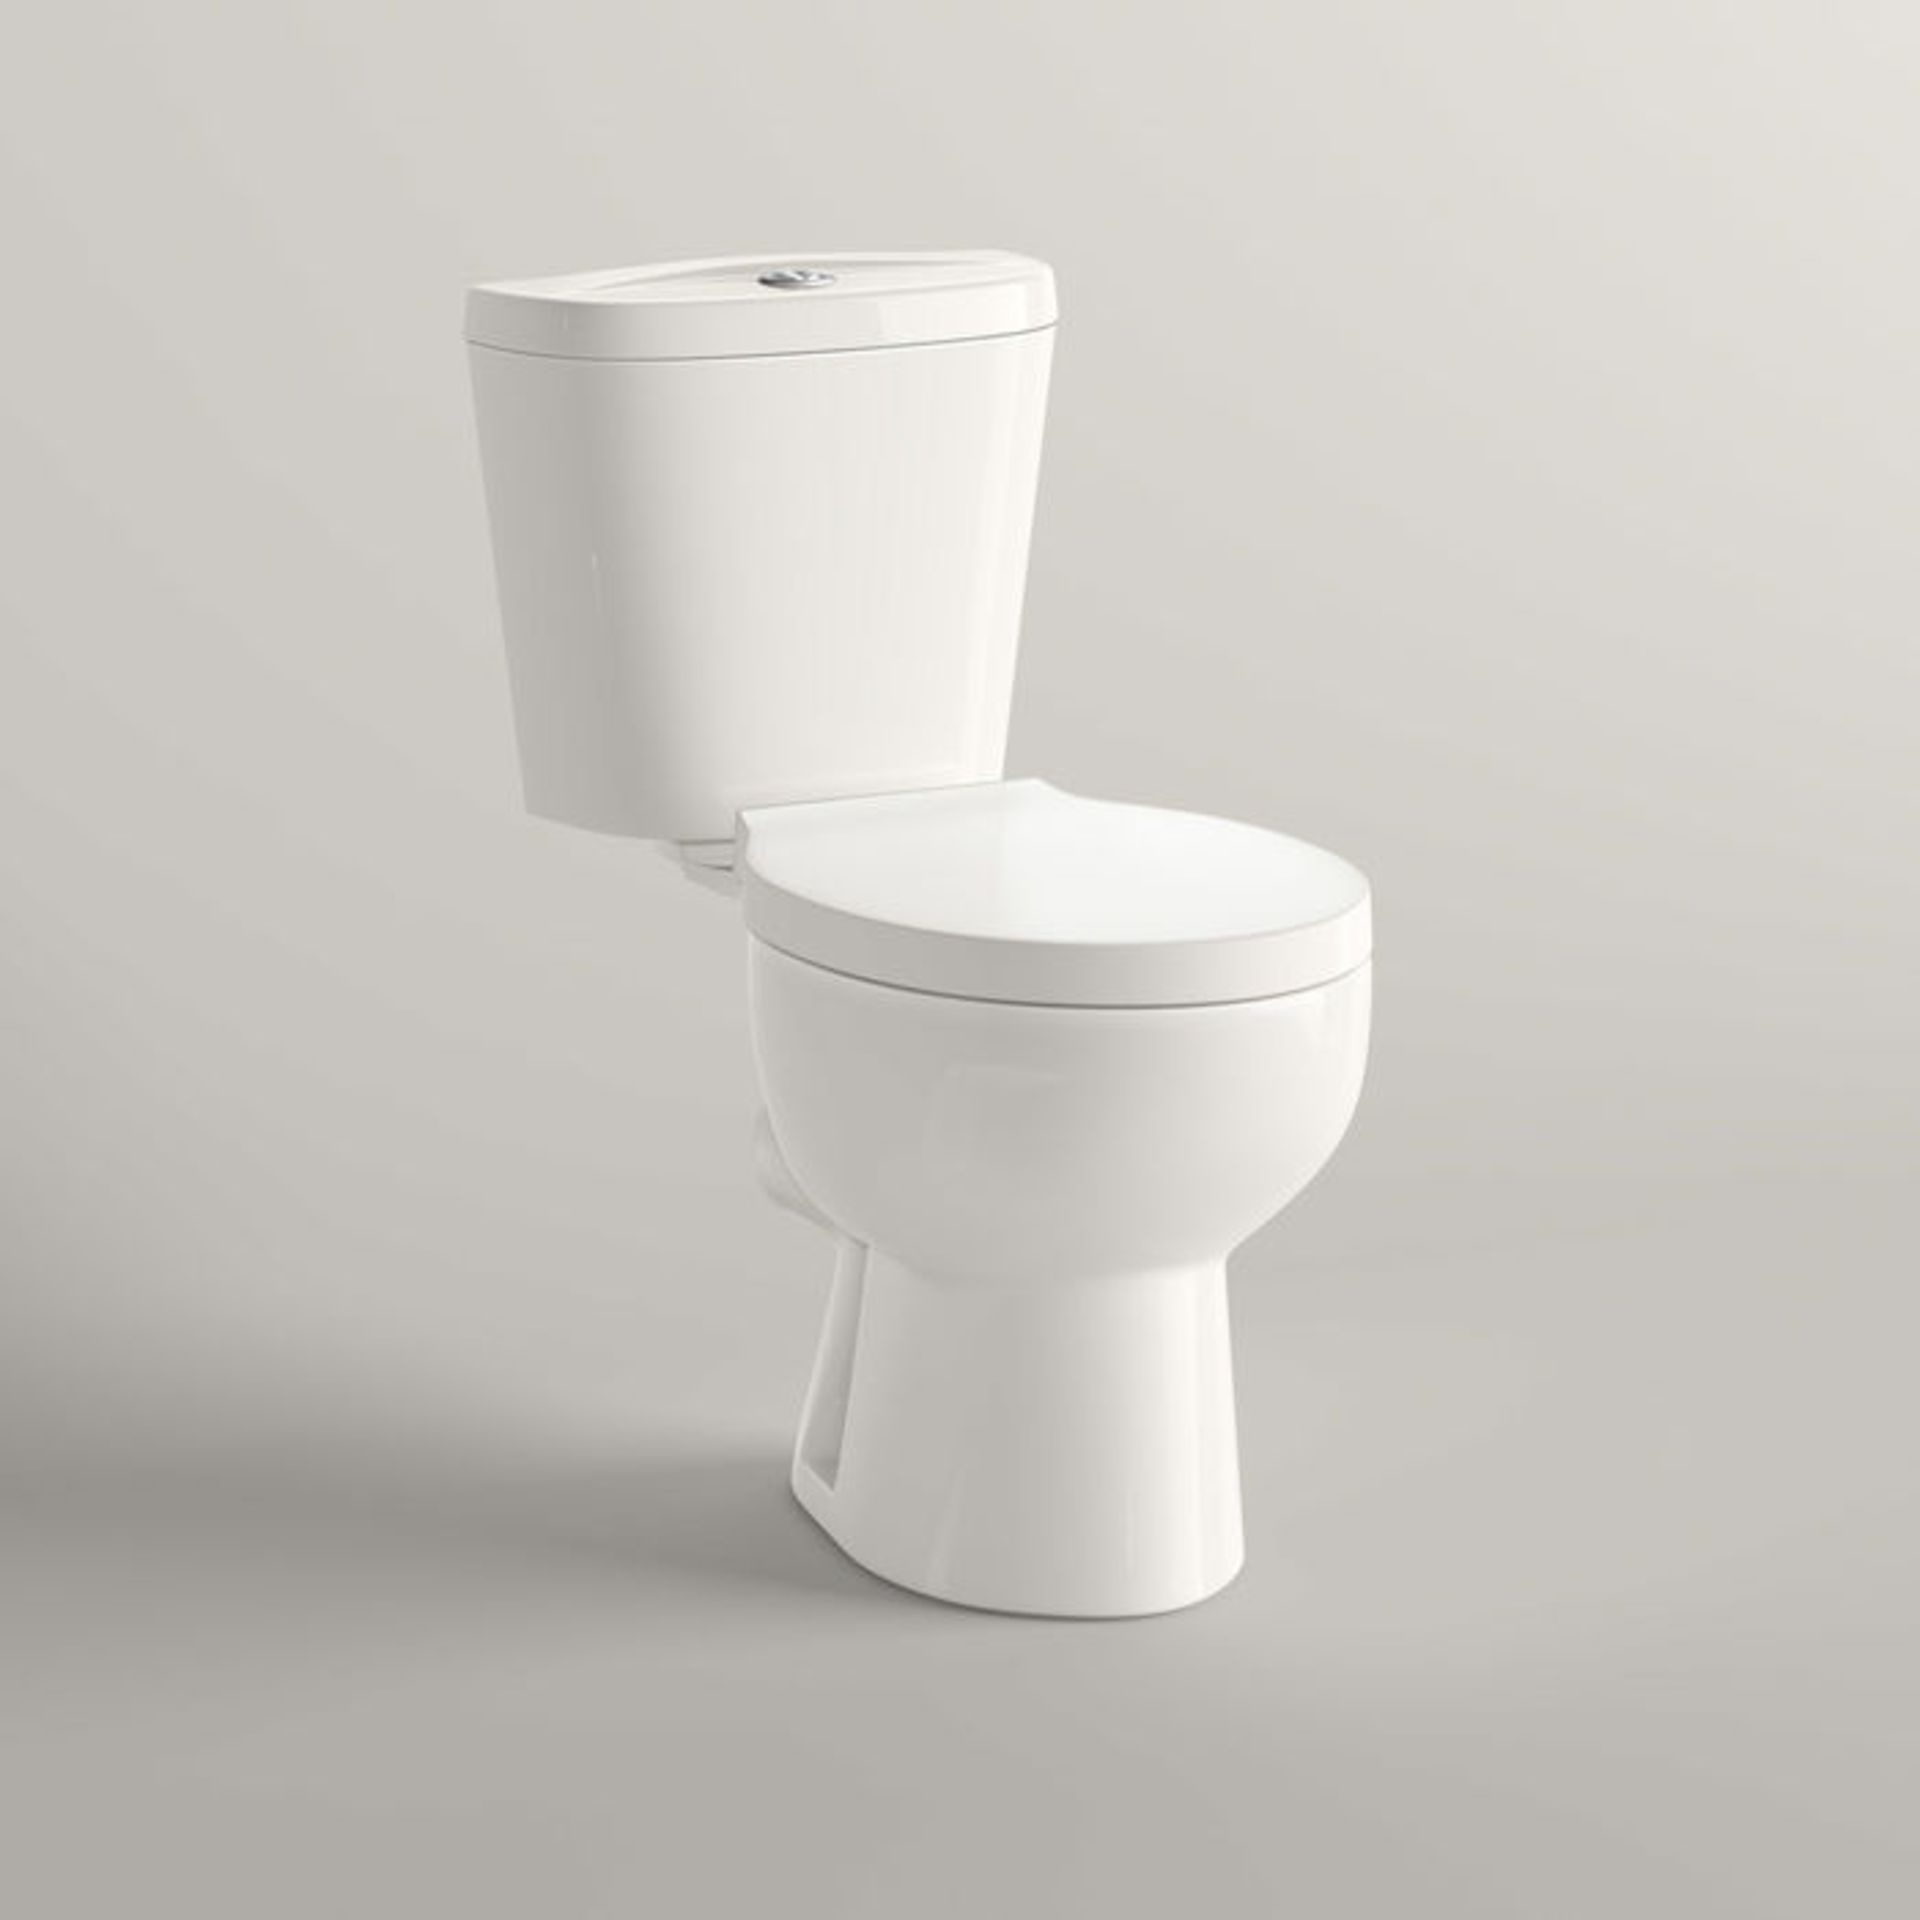 (NV65) Quartz Close Coupled Toilet.. We love this because it is simply great value! Made from W...( - Image 2 of 3